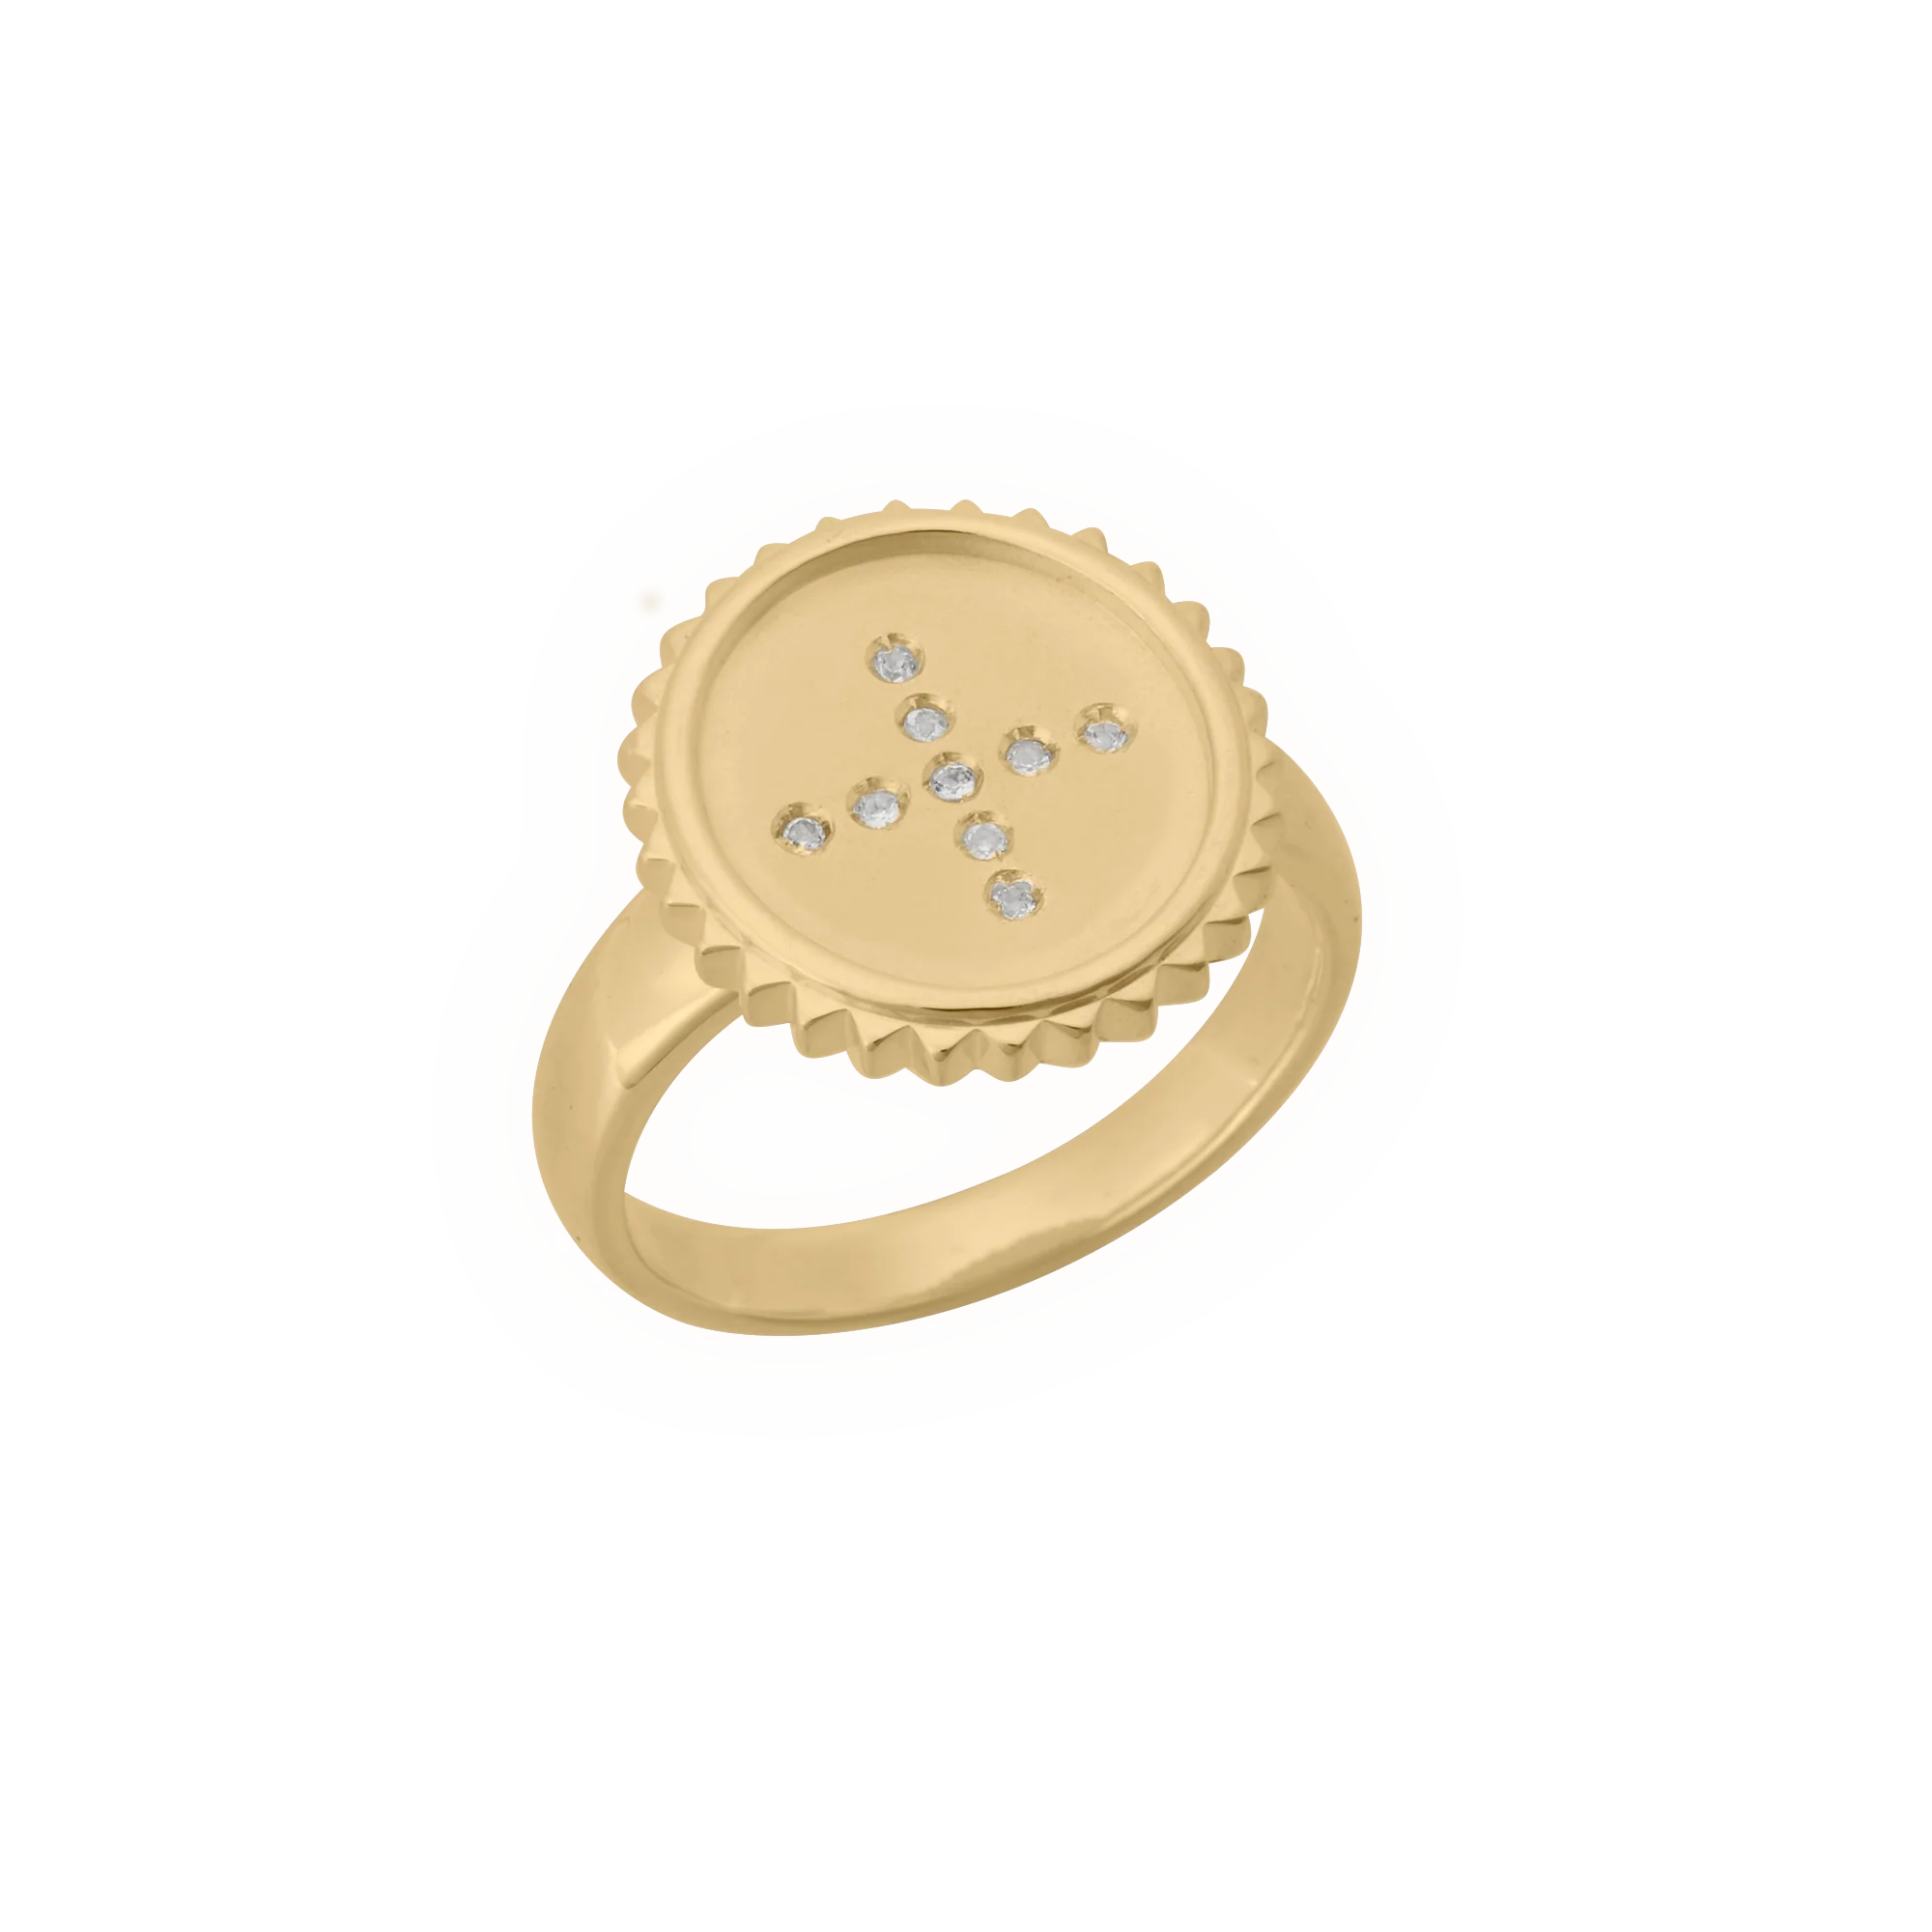 Murkani Halcyon Ring in 18k Yellow Gold Plate